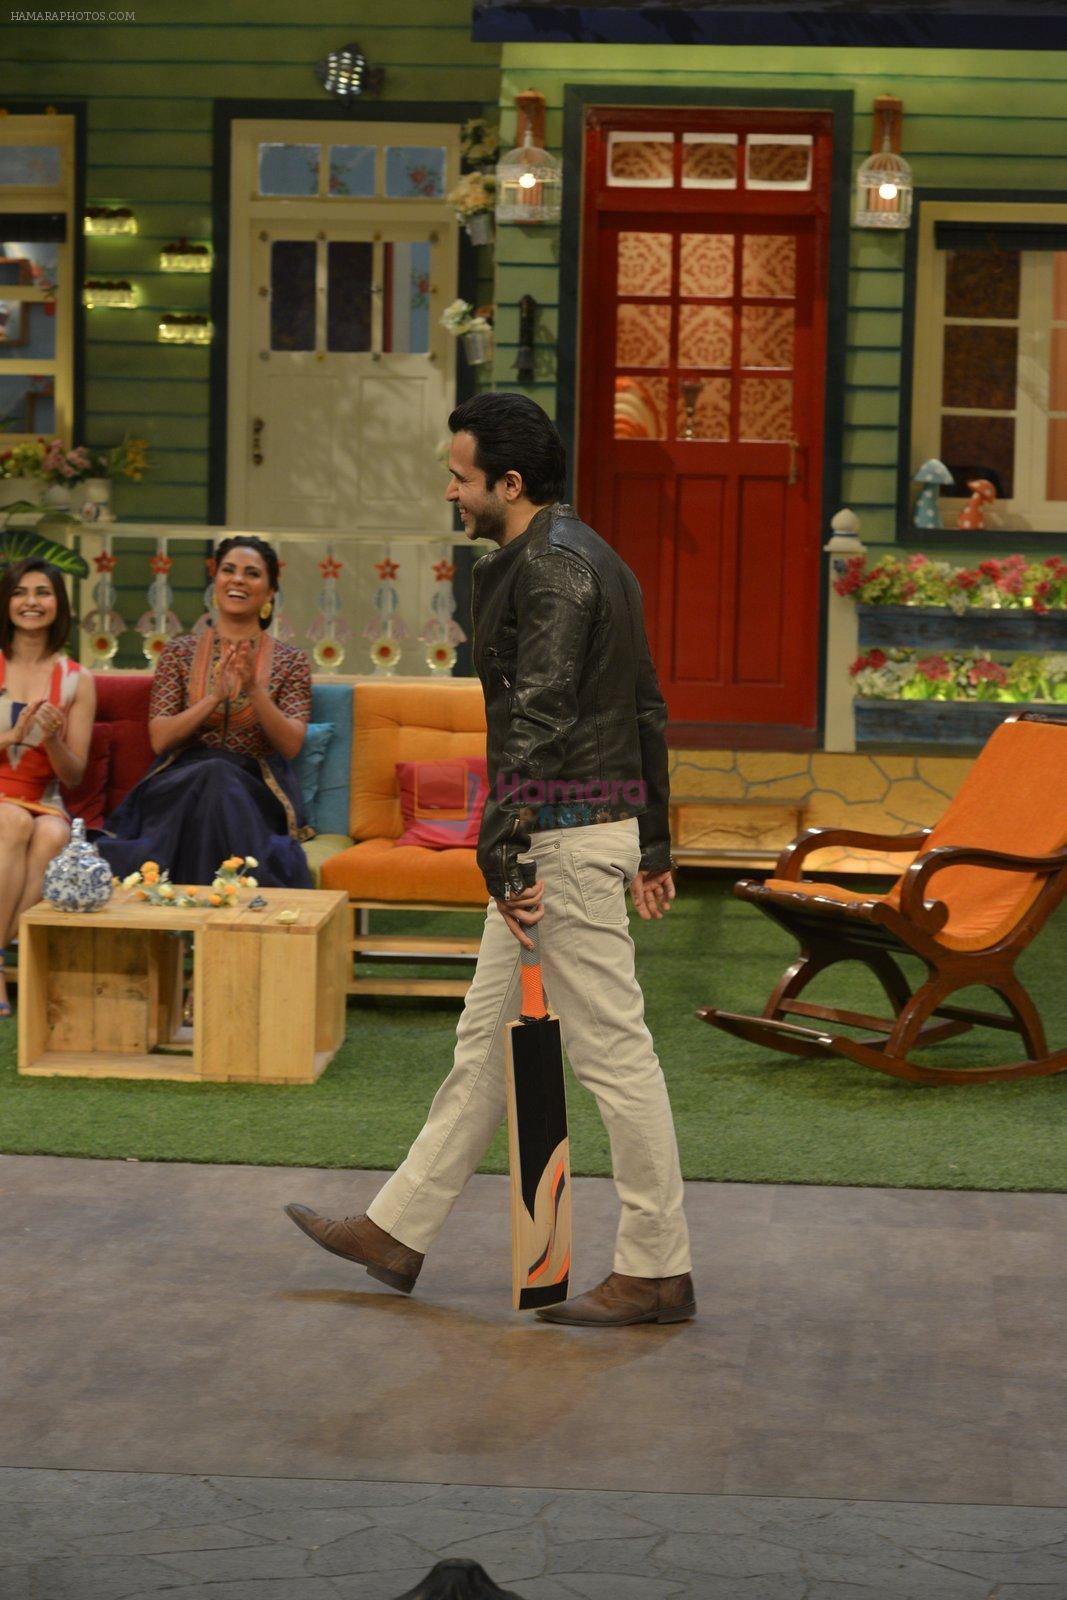 Emraan Hashmi at the promotion of Azhar on location of The Kapil Sharma Show on 22nd April 2016